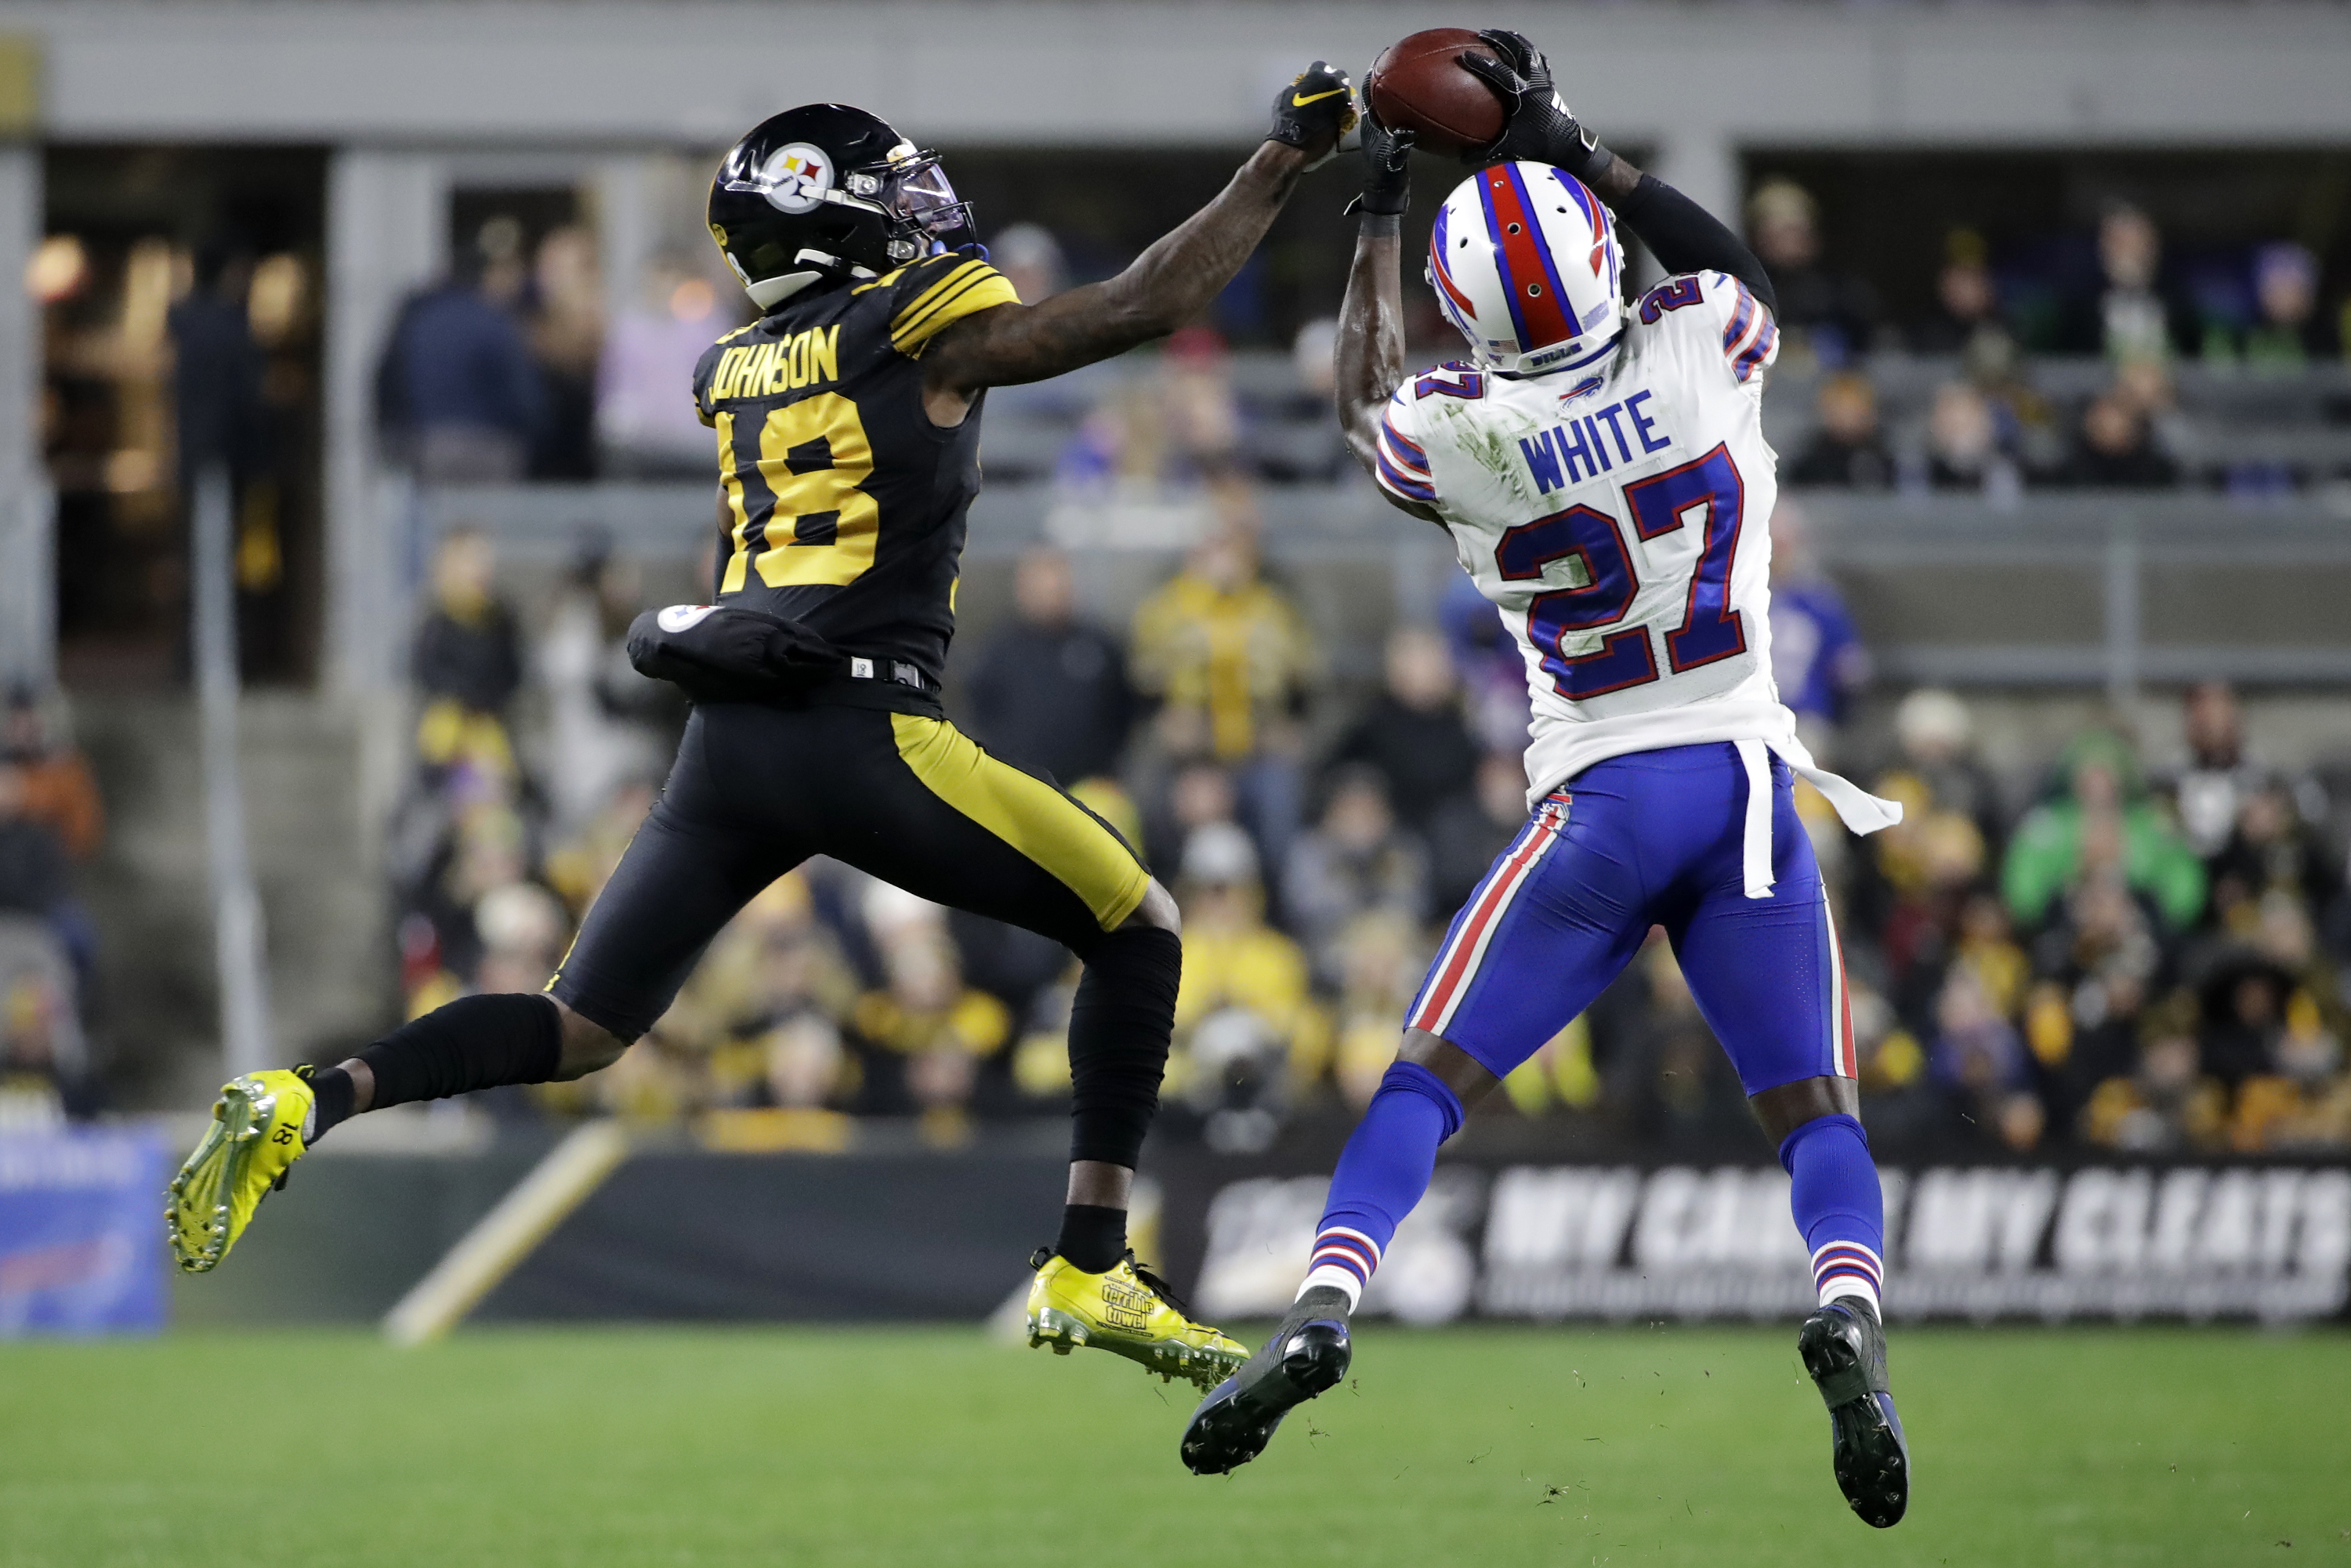 Steelers hope to learn from offensive struggles